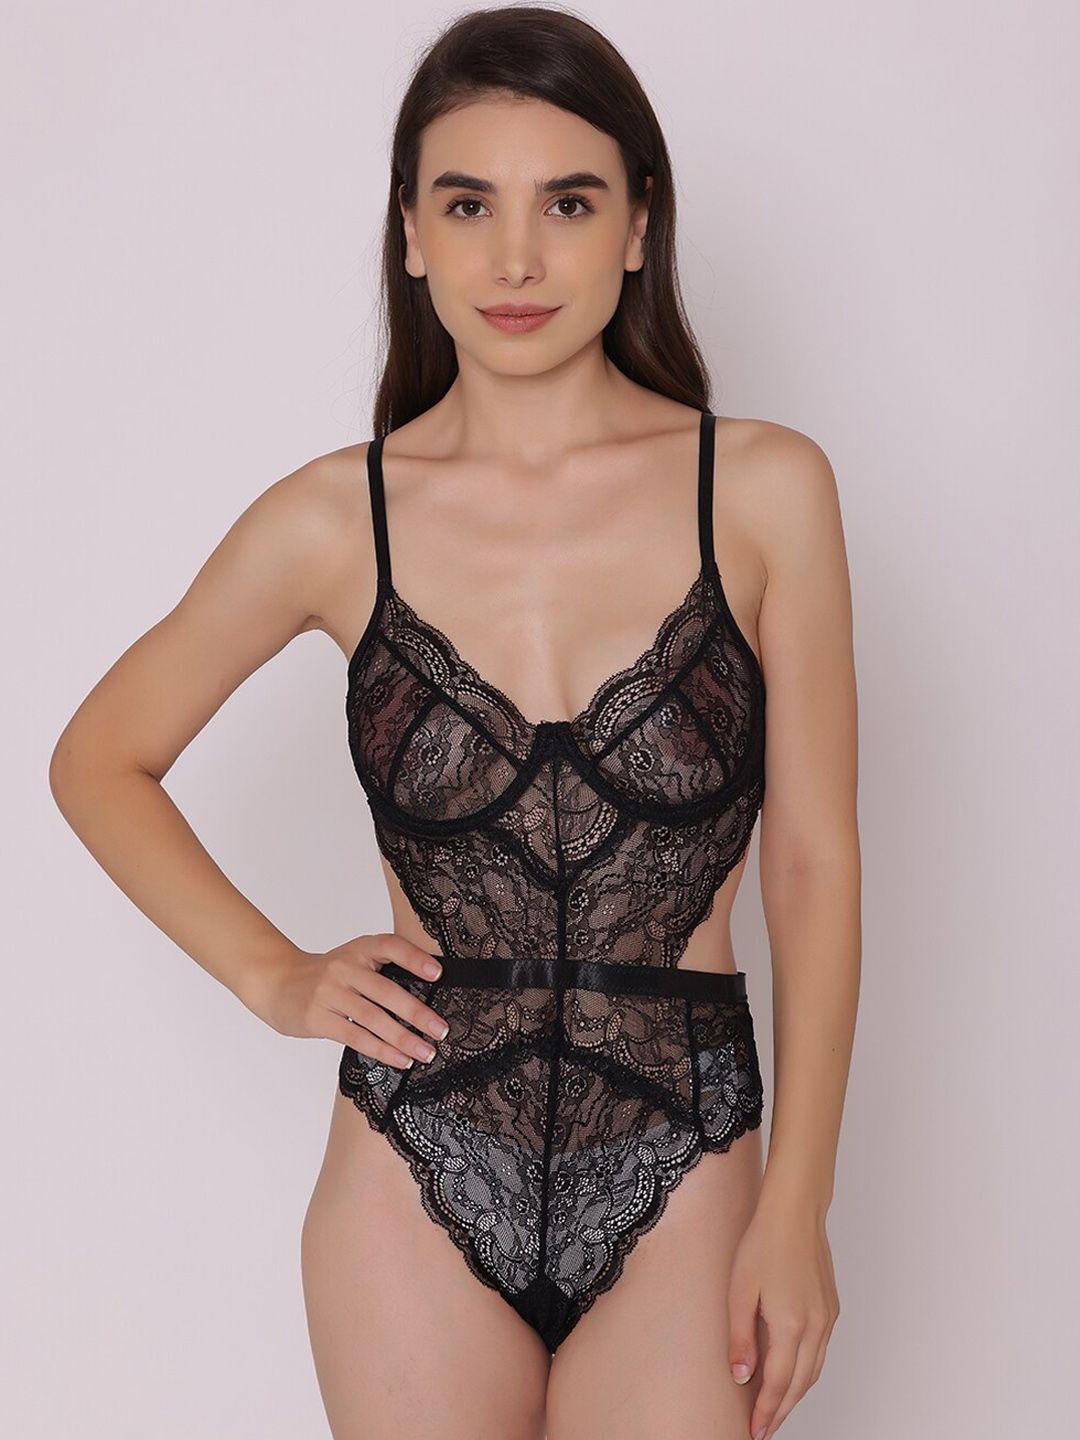 treasure chest veronica: sheer non padded non wired lace bodysuit